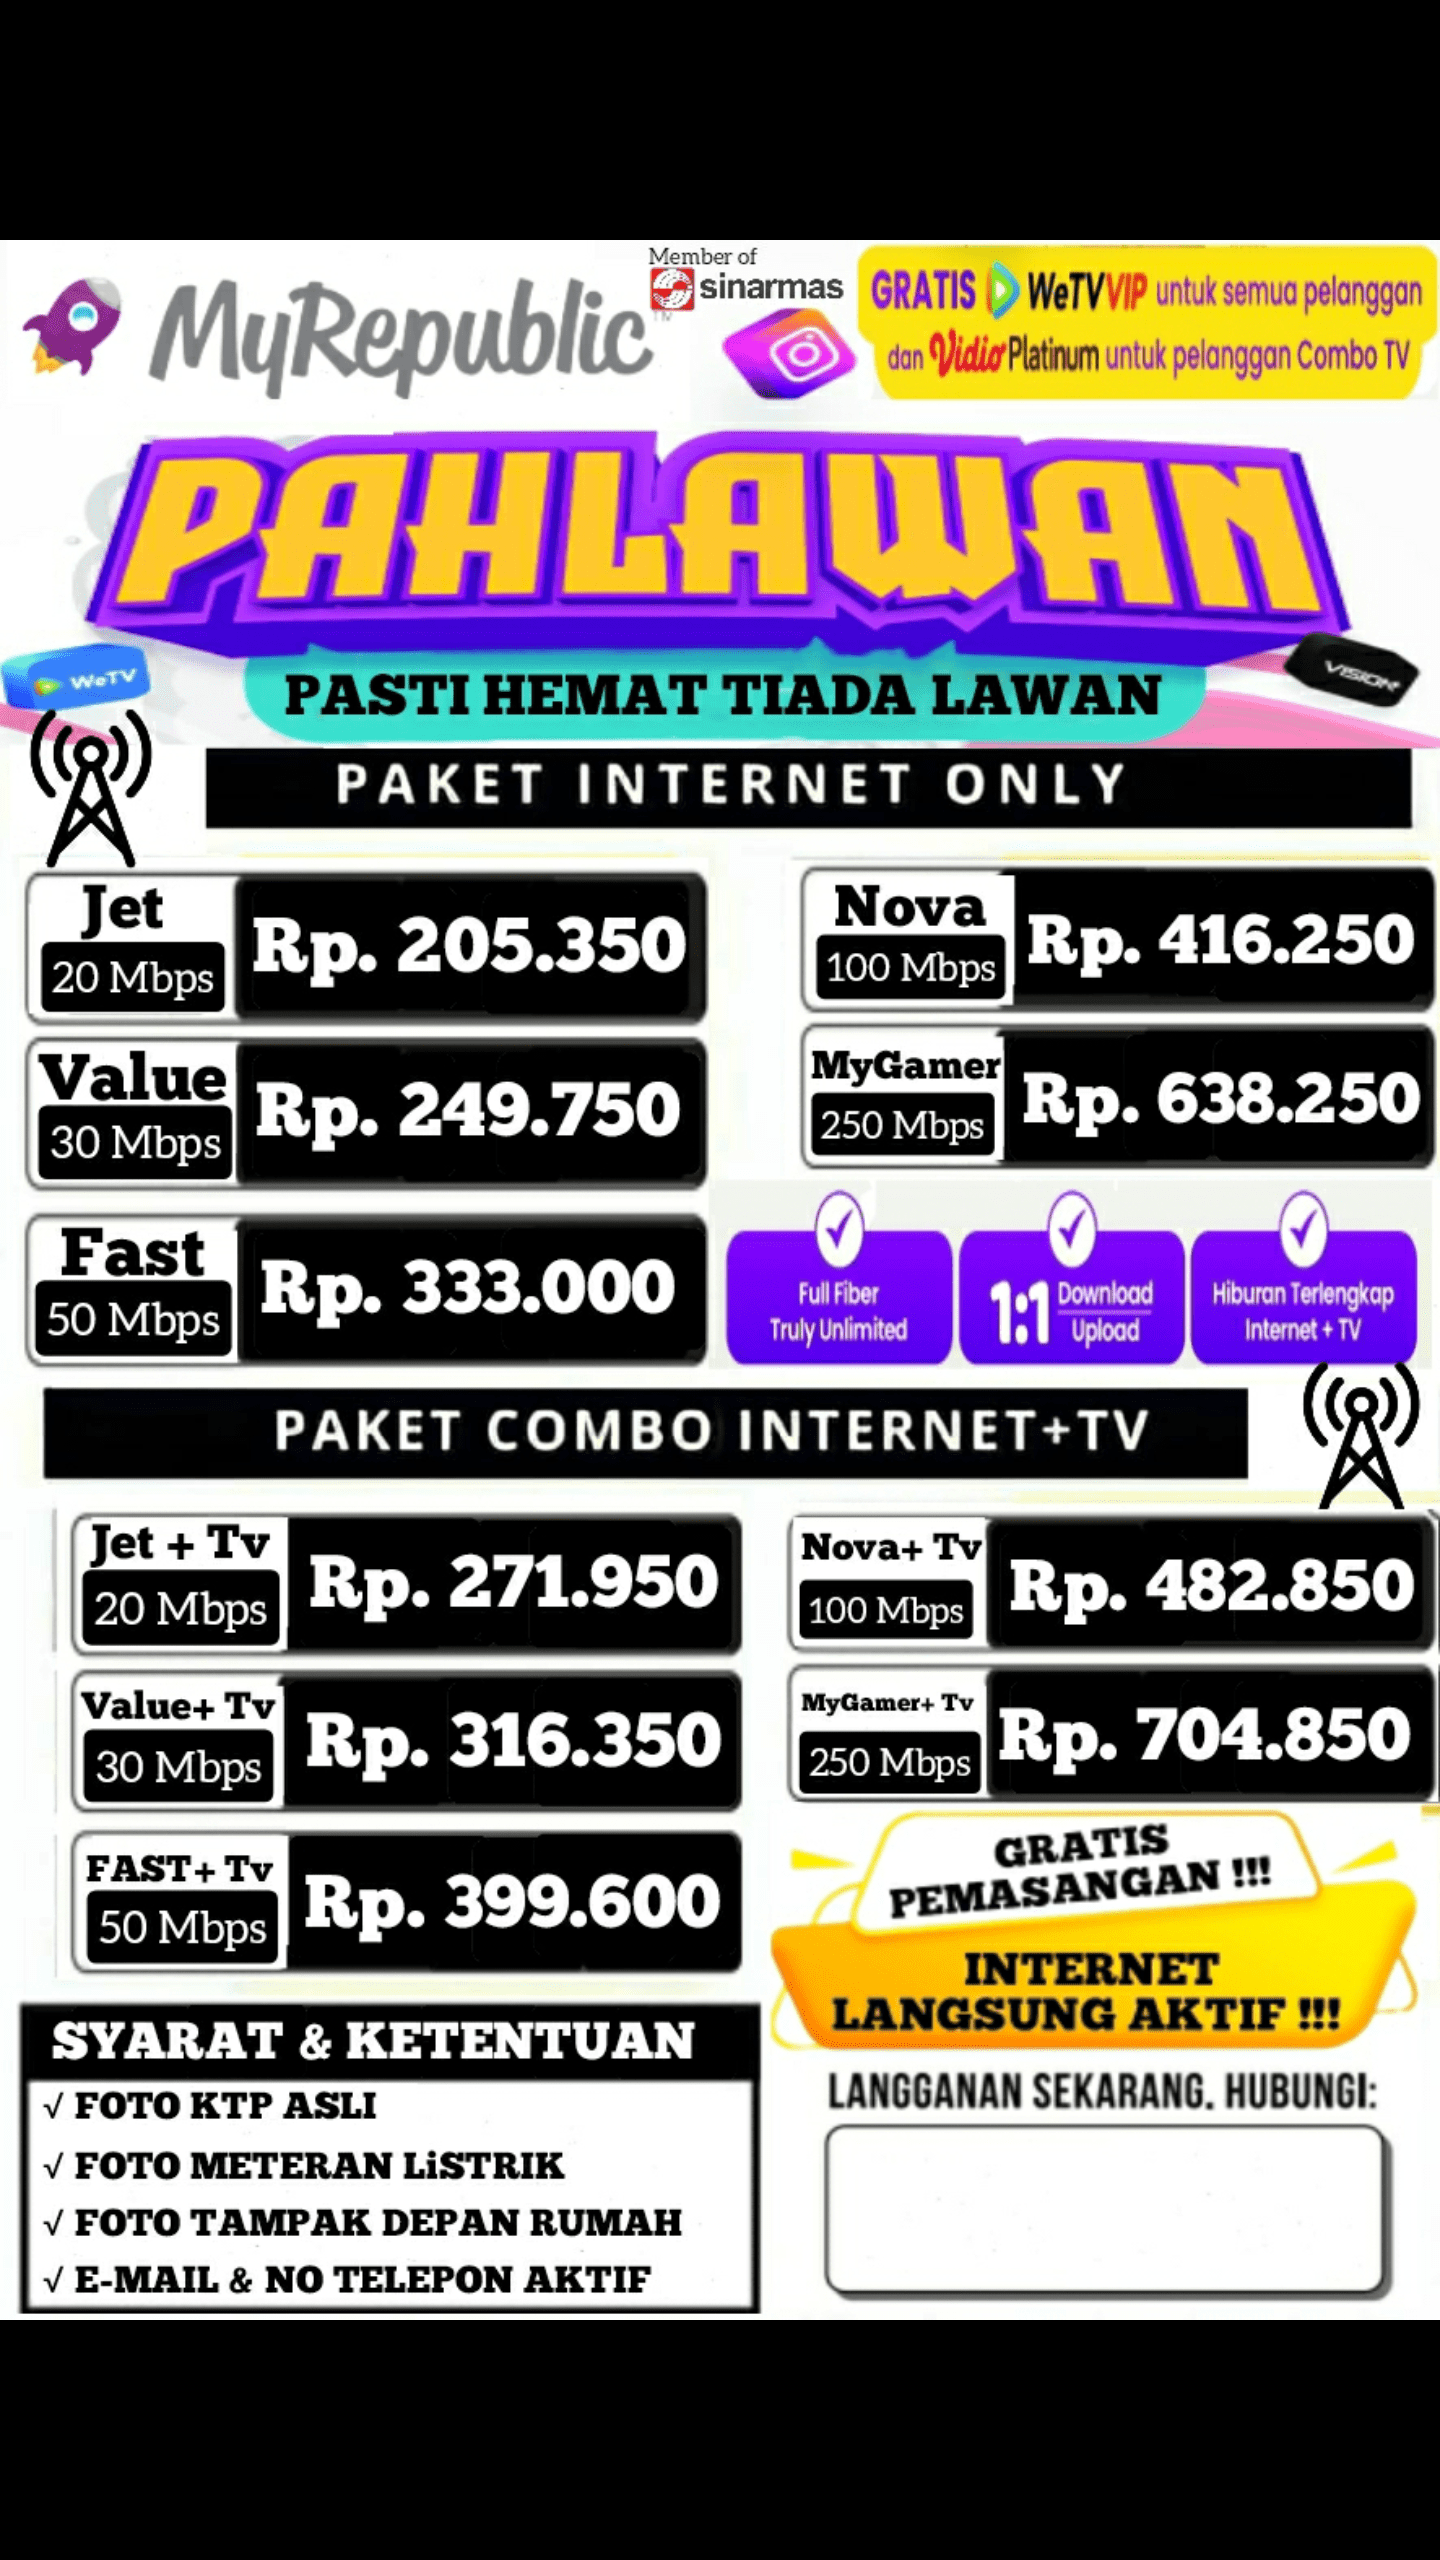 For more info : 082124563139 (Whatsapp)